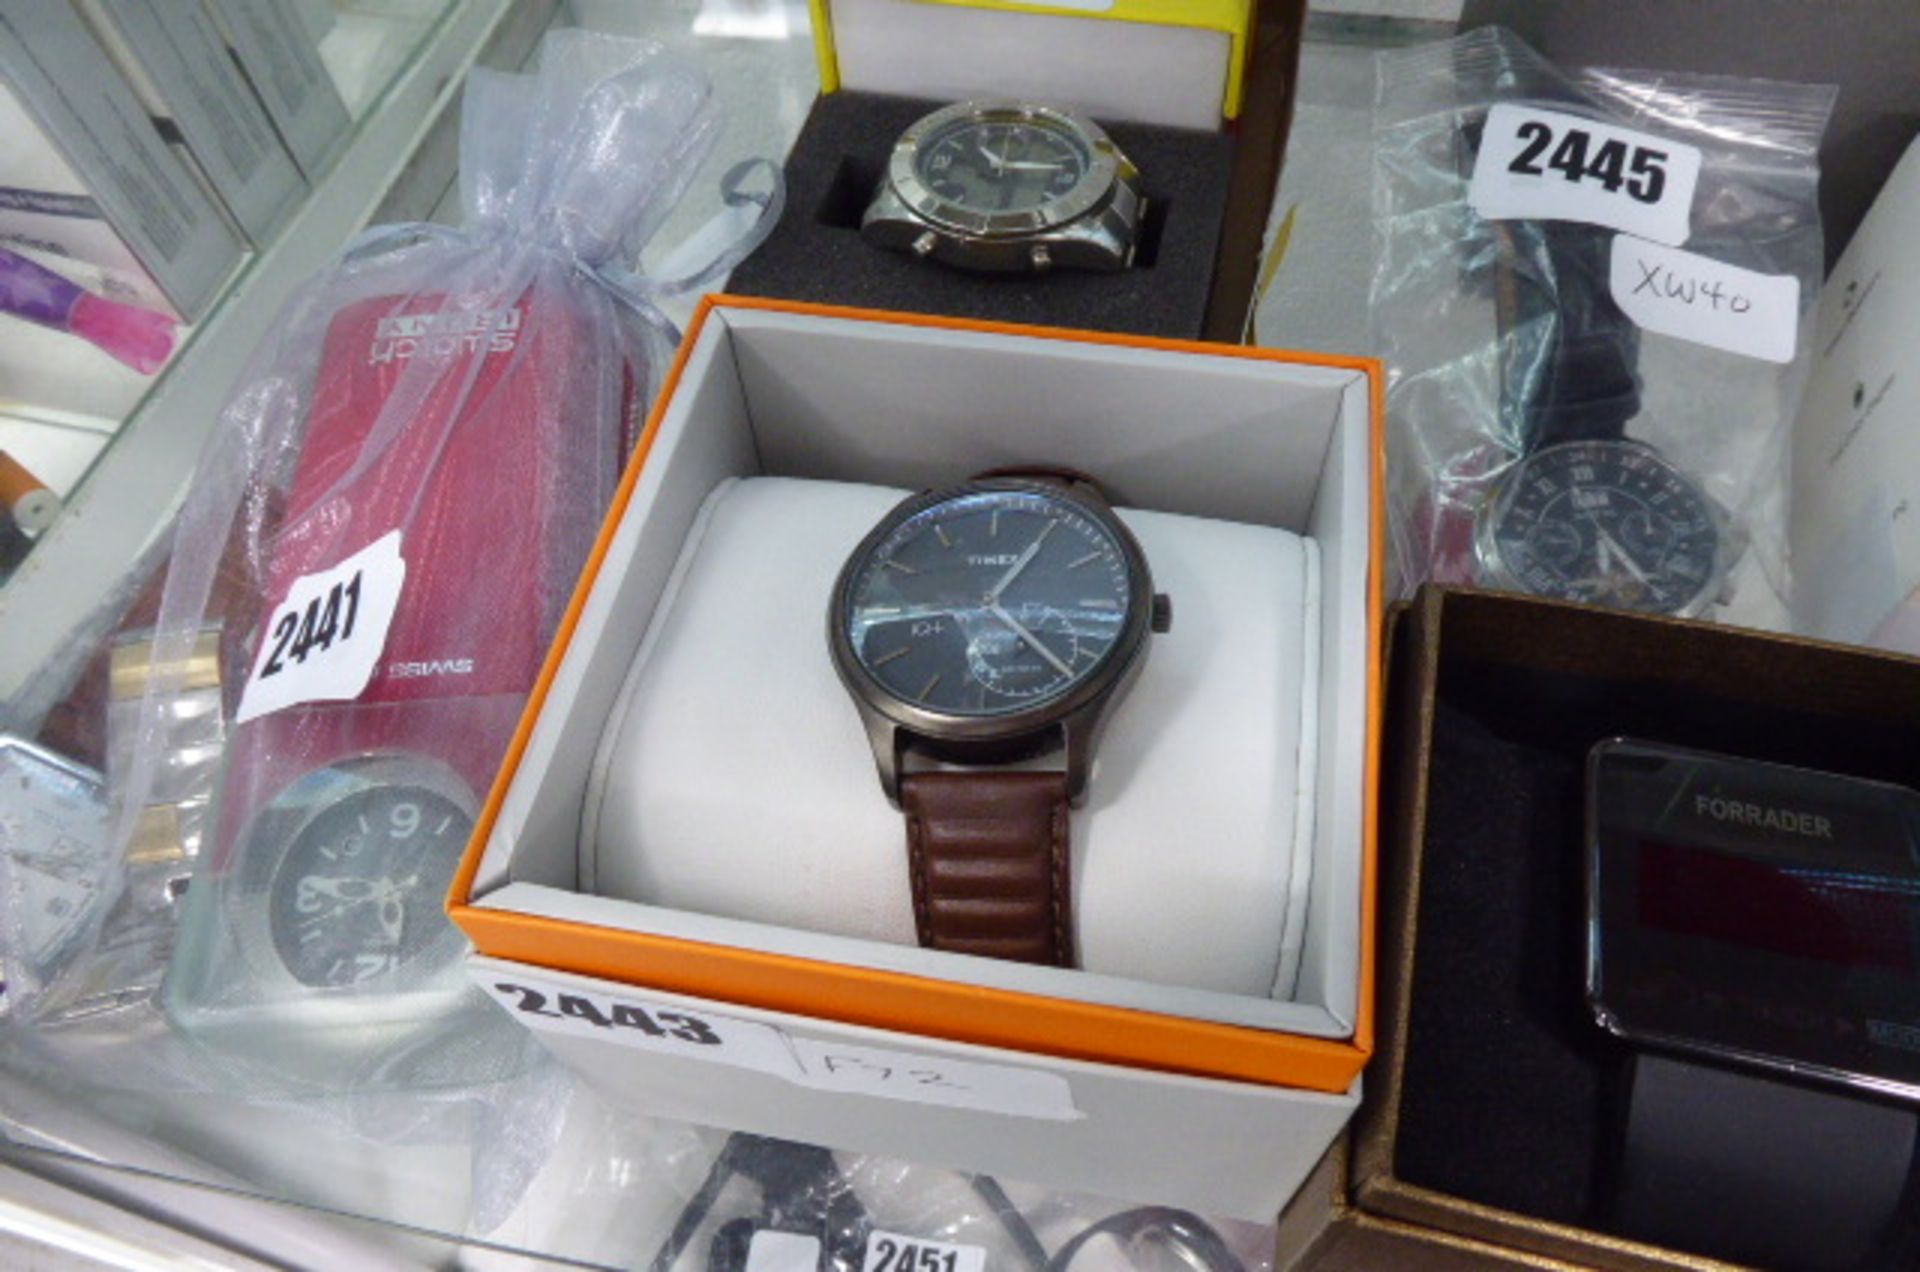 2478 Timex brown leather strapped wrist watch in box